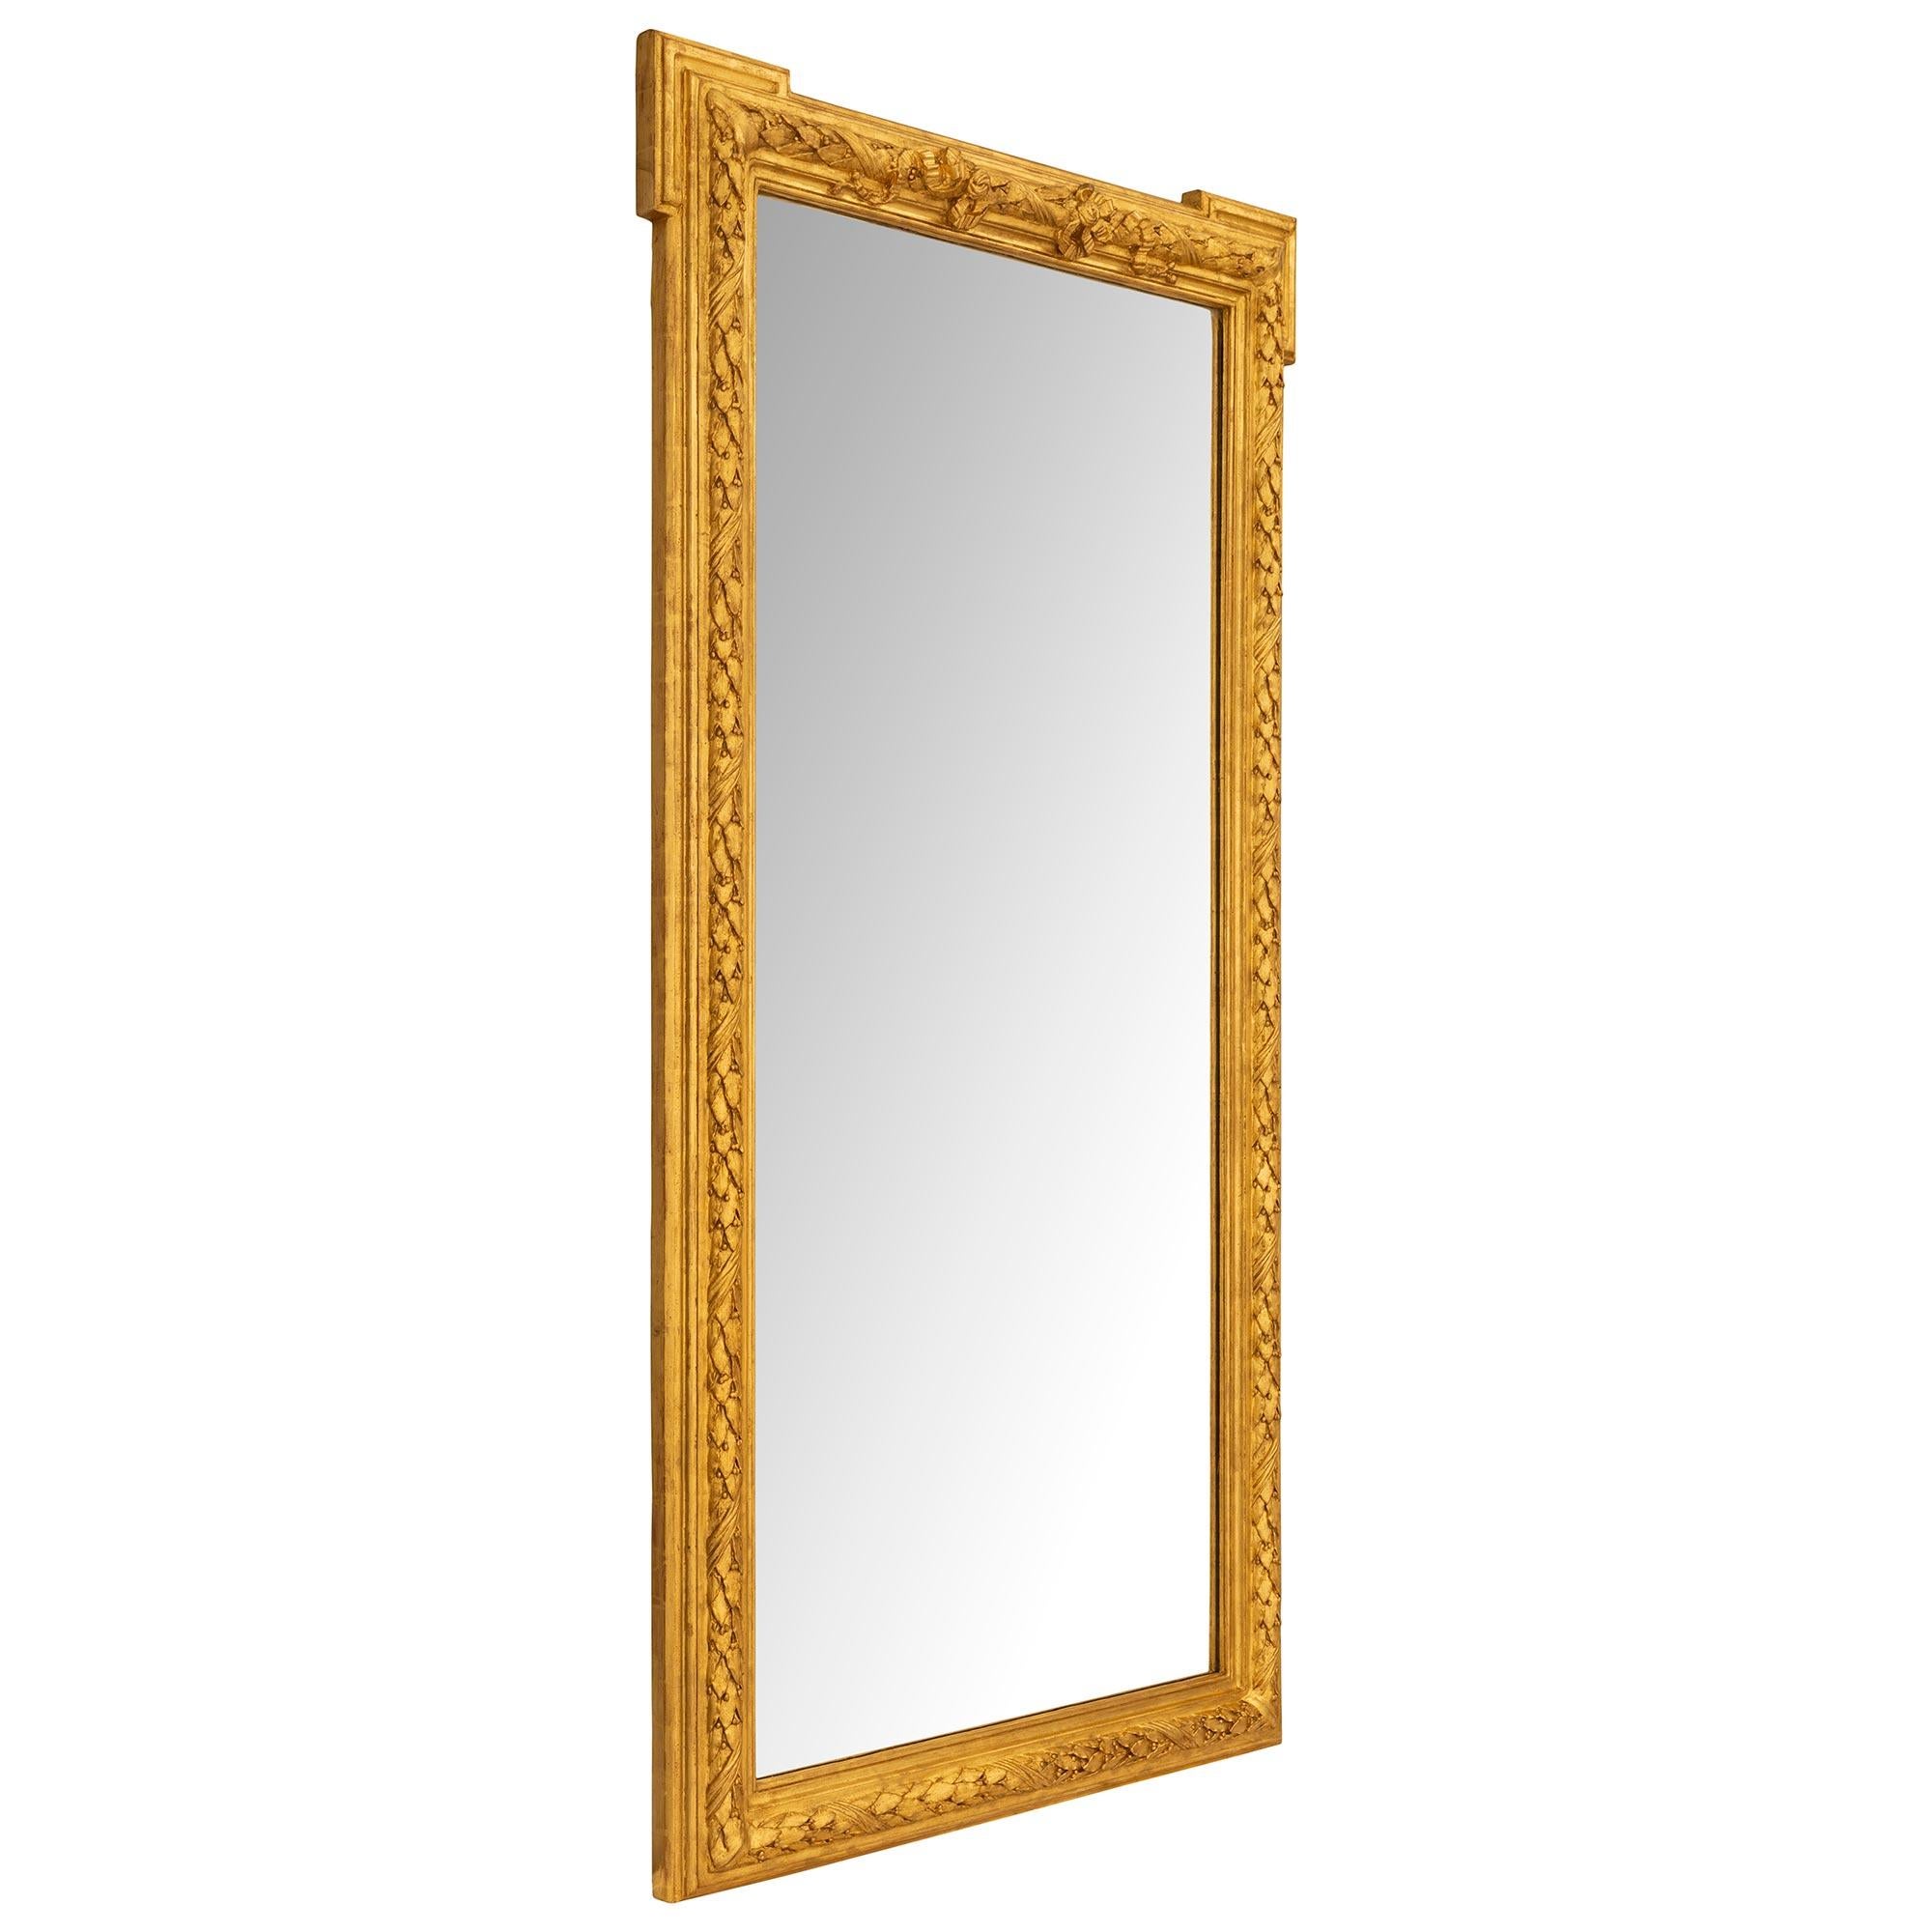 An elegant pair of French 19th century Louis XVI st. Giltwood mirrors. Surrounding each tall rectangular mirror plate is a detailed Giltwood frame with an inner and outer uninterrupted mottled edge. The center of the frame has a handsome and bold